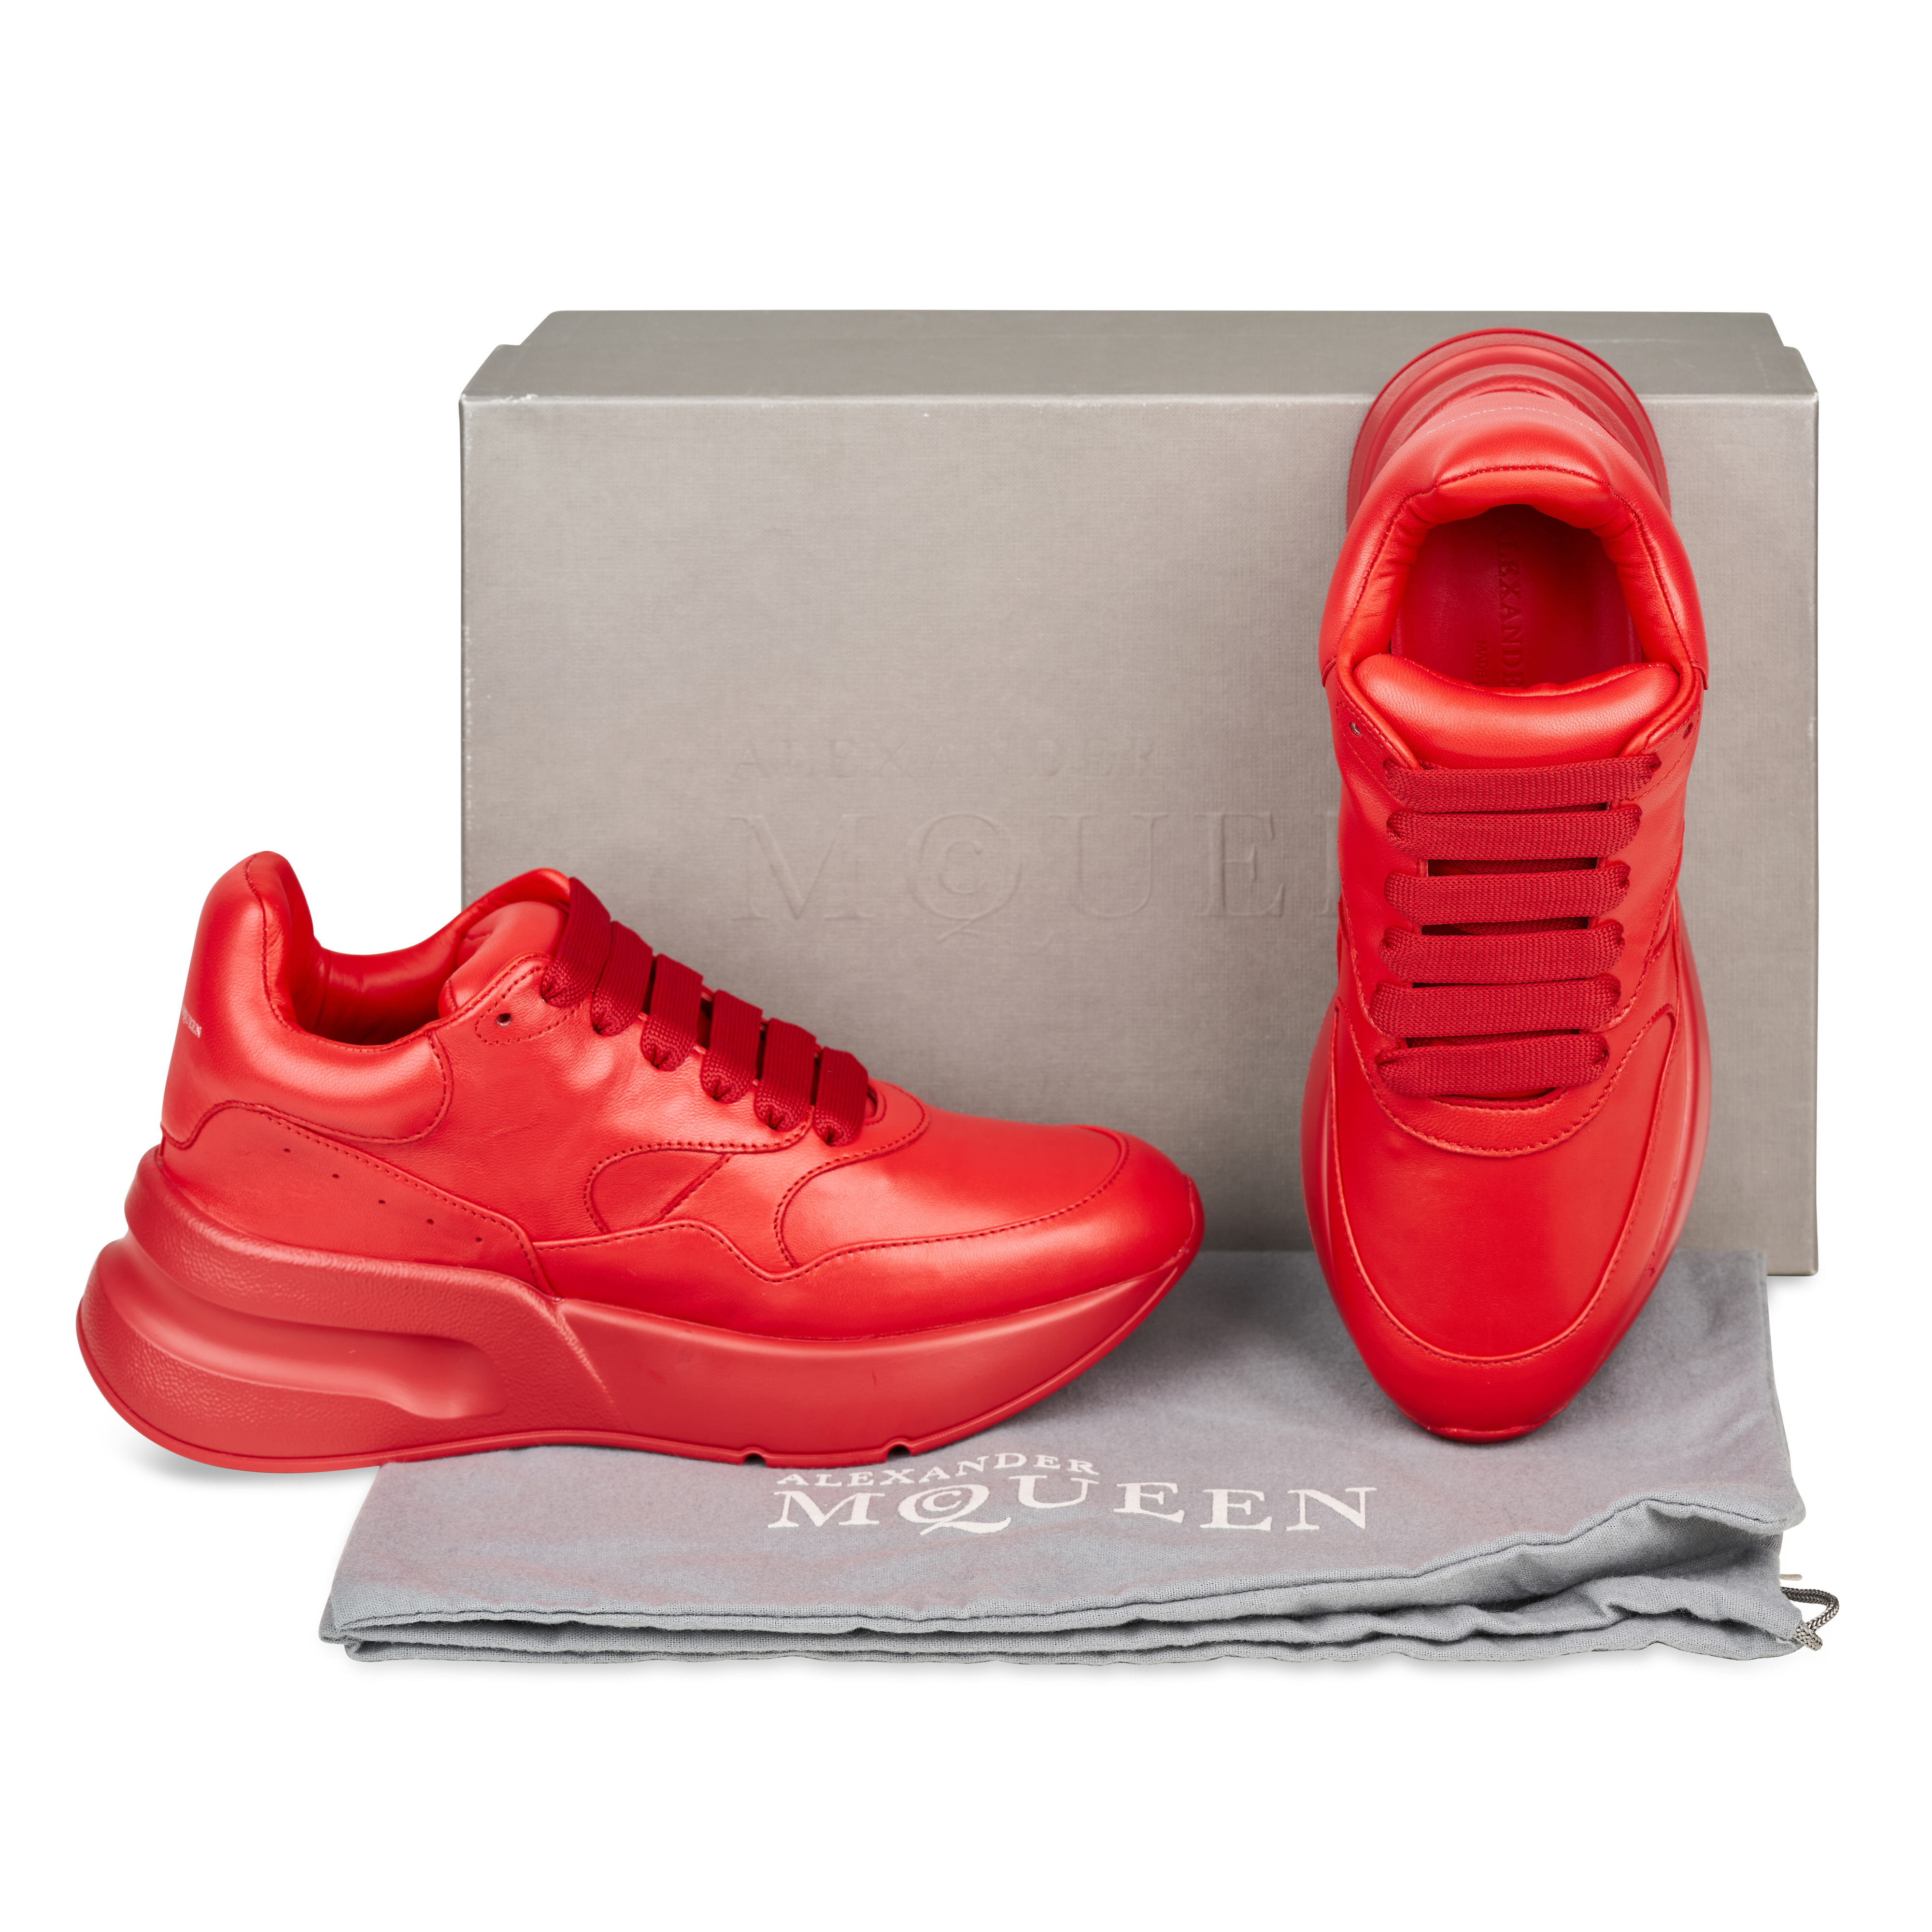 NO RESERVE ALEXANDER MCQUEEN RED LEATHER SNEAKERS - Image 2 of 2